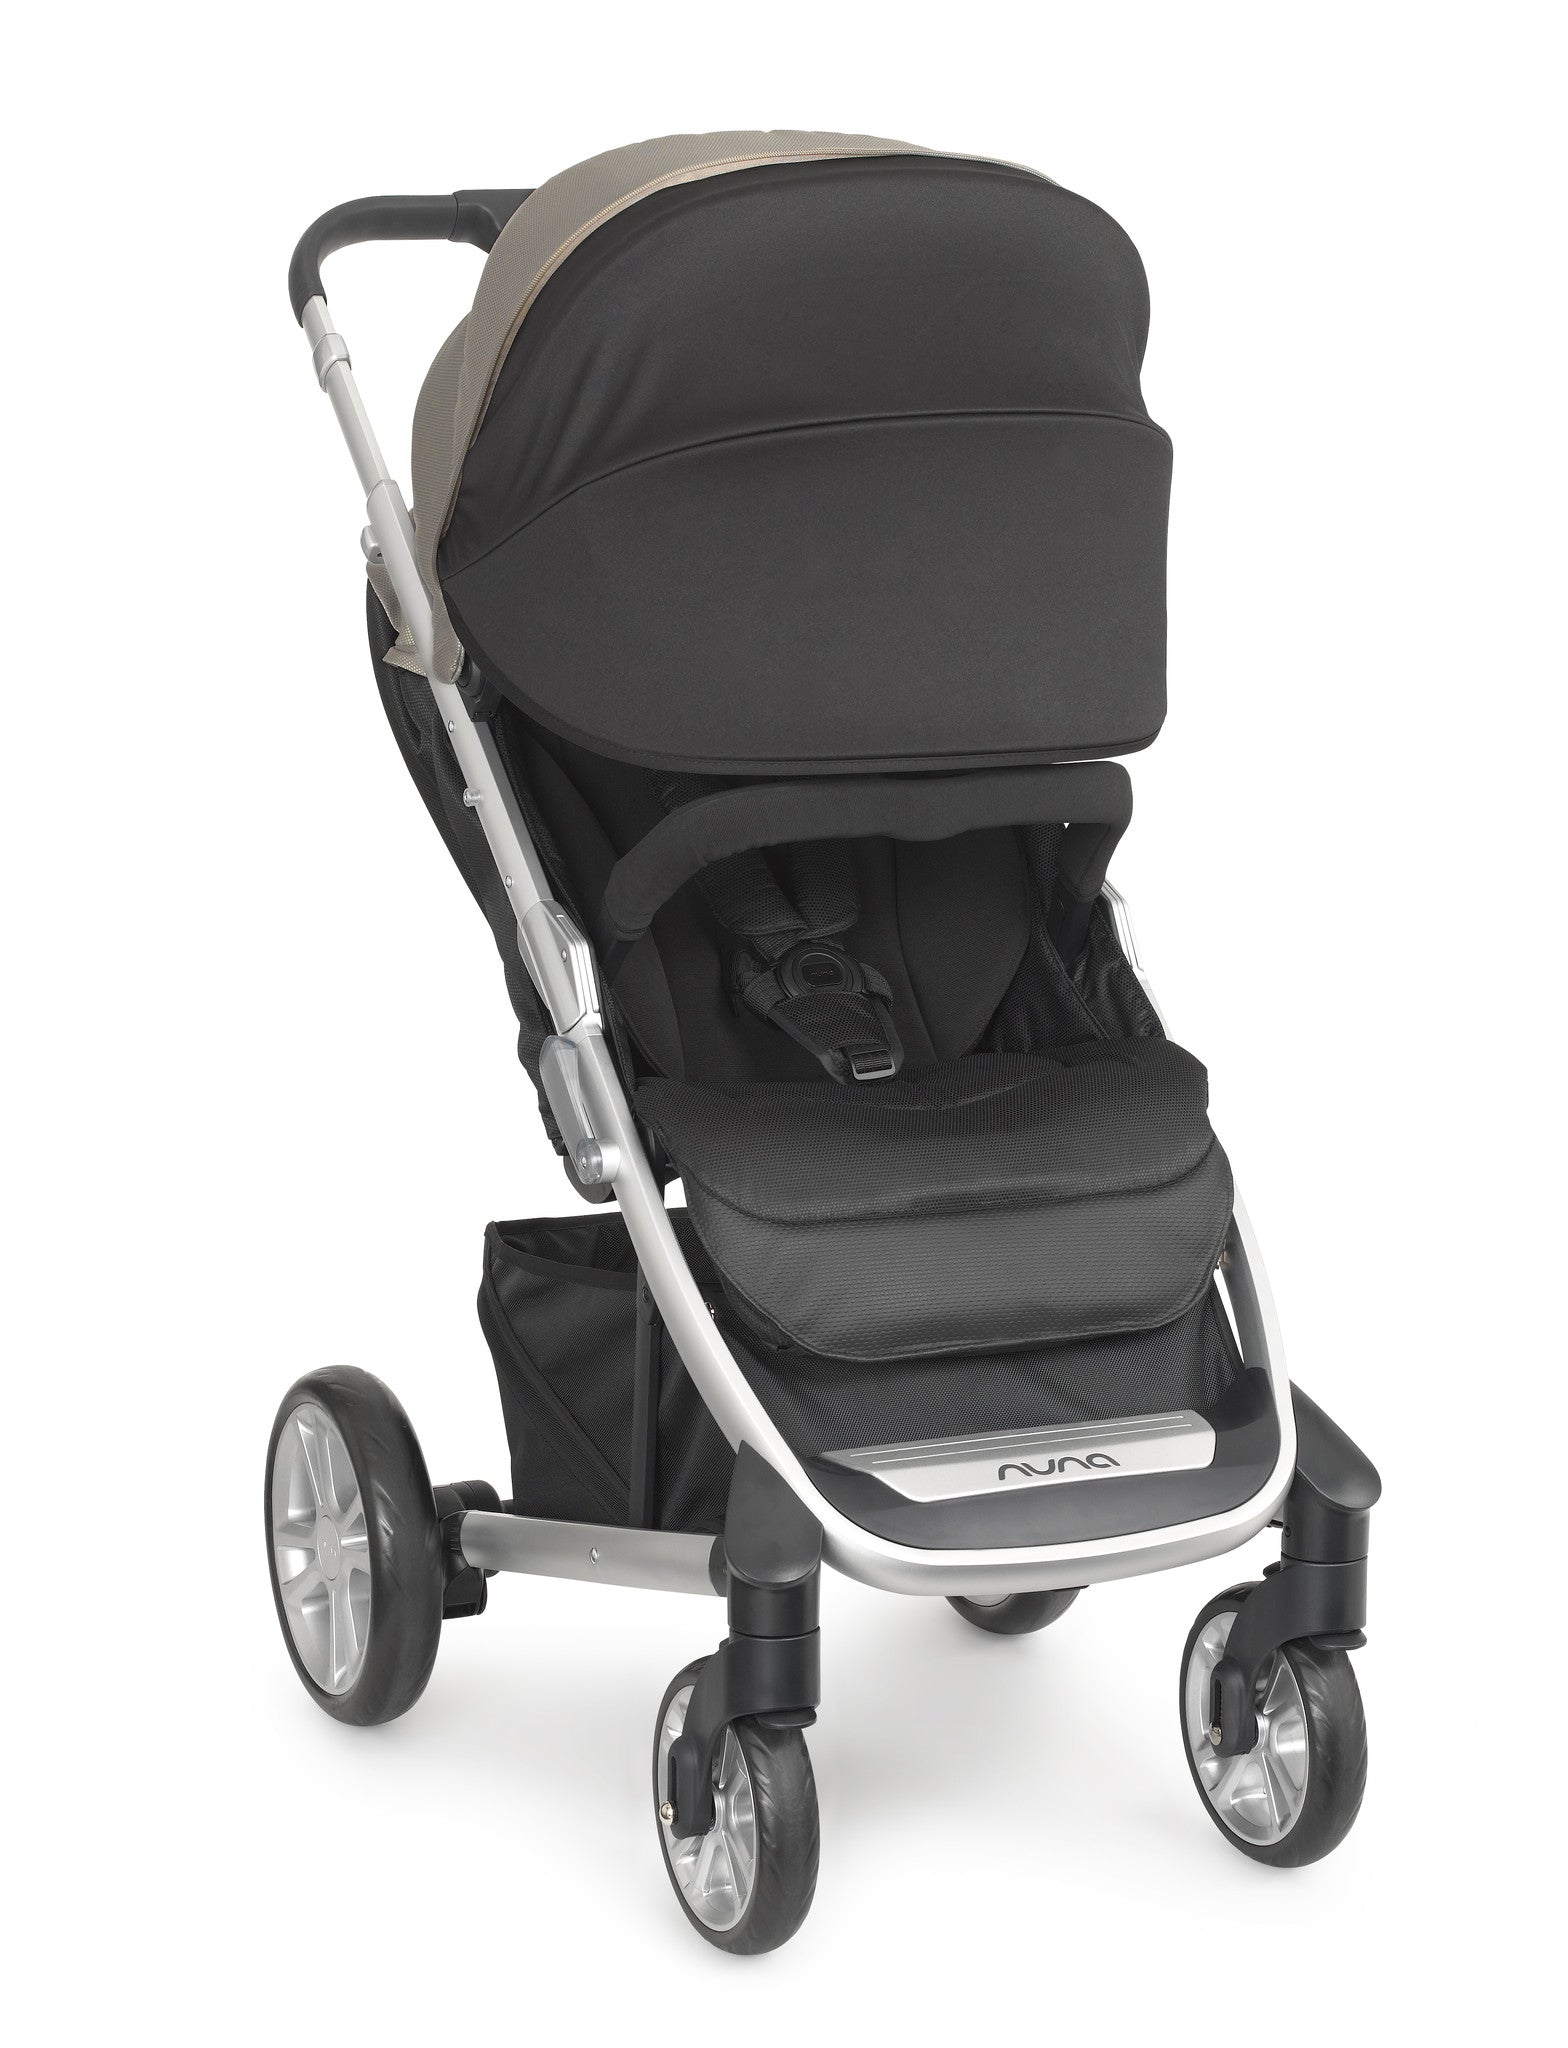 Stroller Review: Maxi-Cosi Lara Ultra-Compact Stroller + A GIVEAWAY! -  NOELLE HOTALING